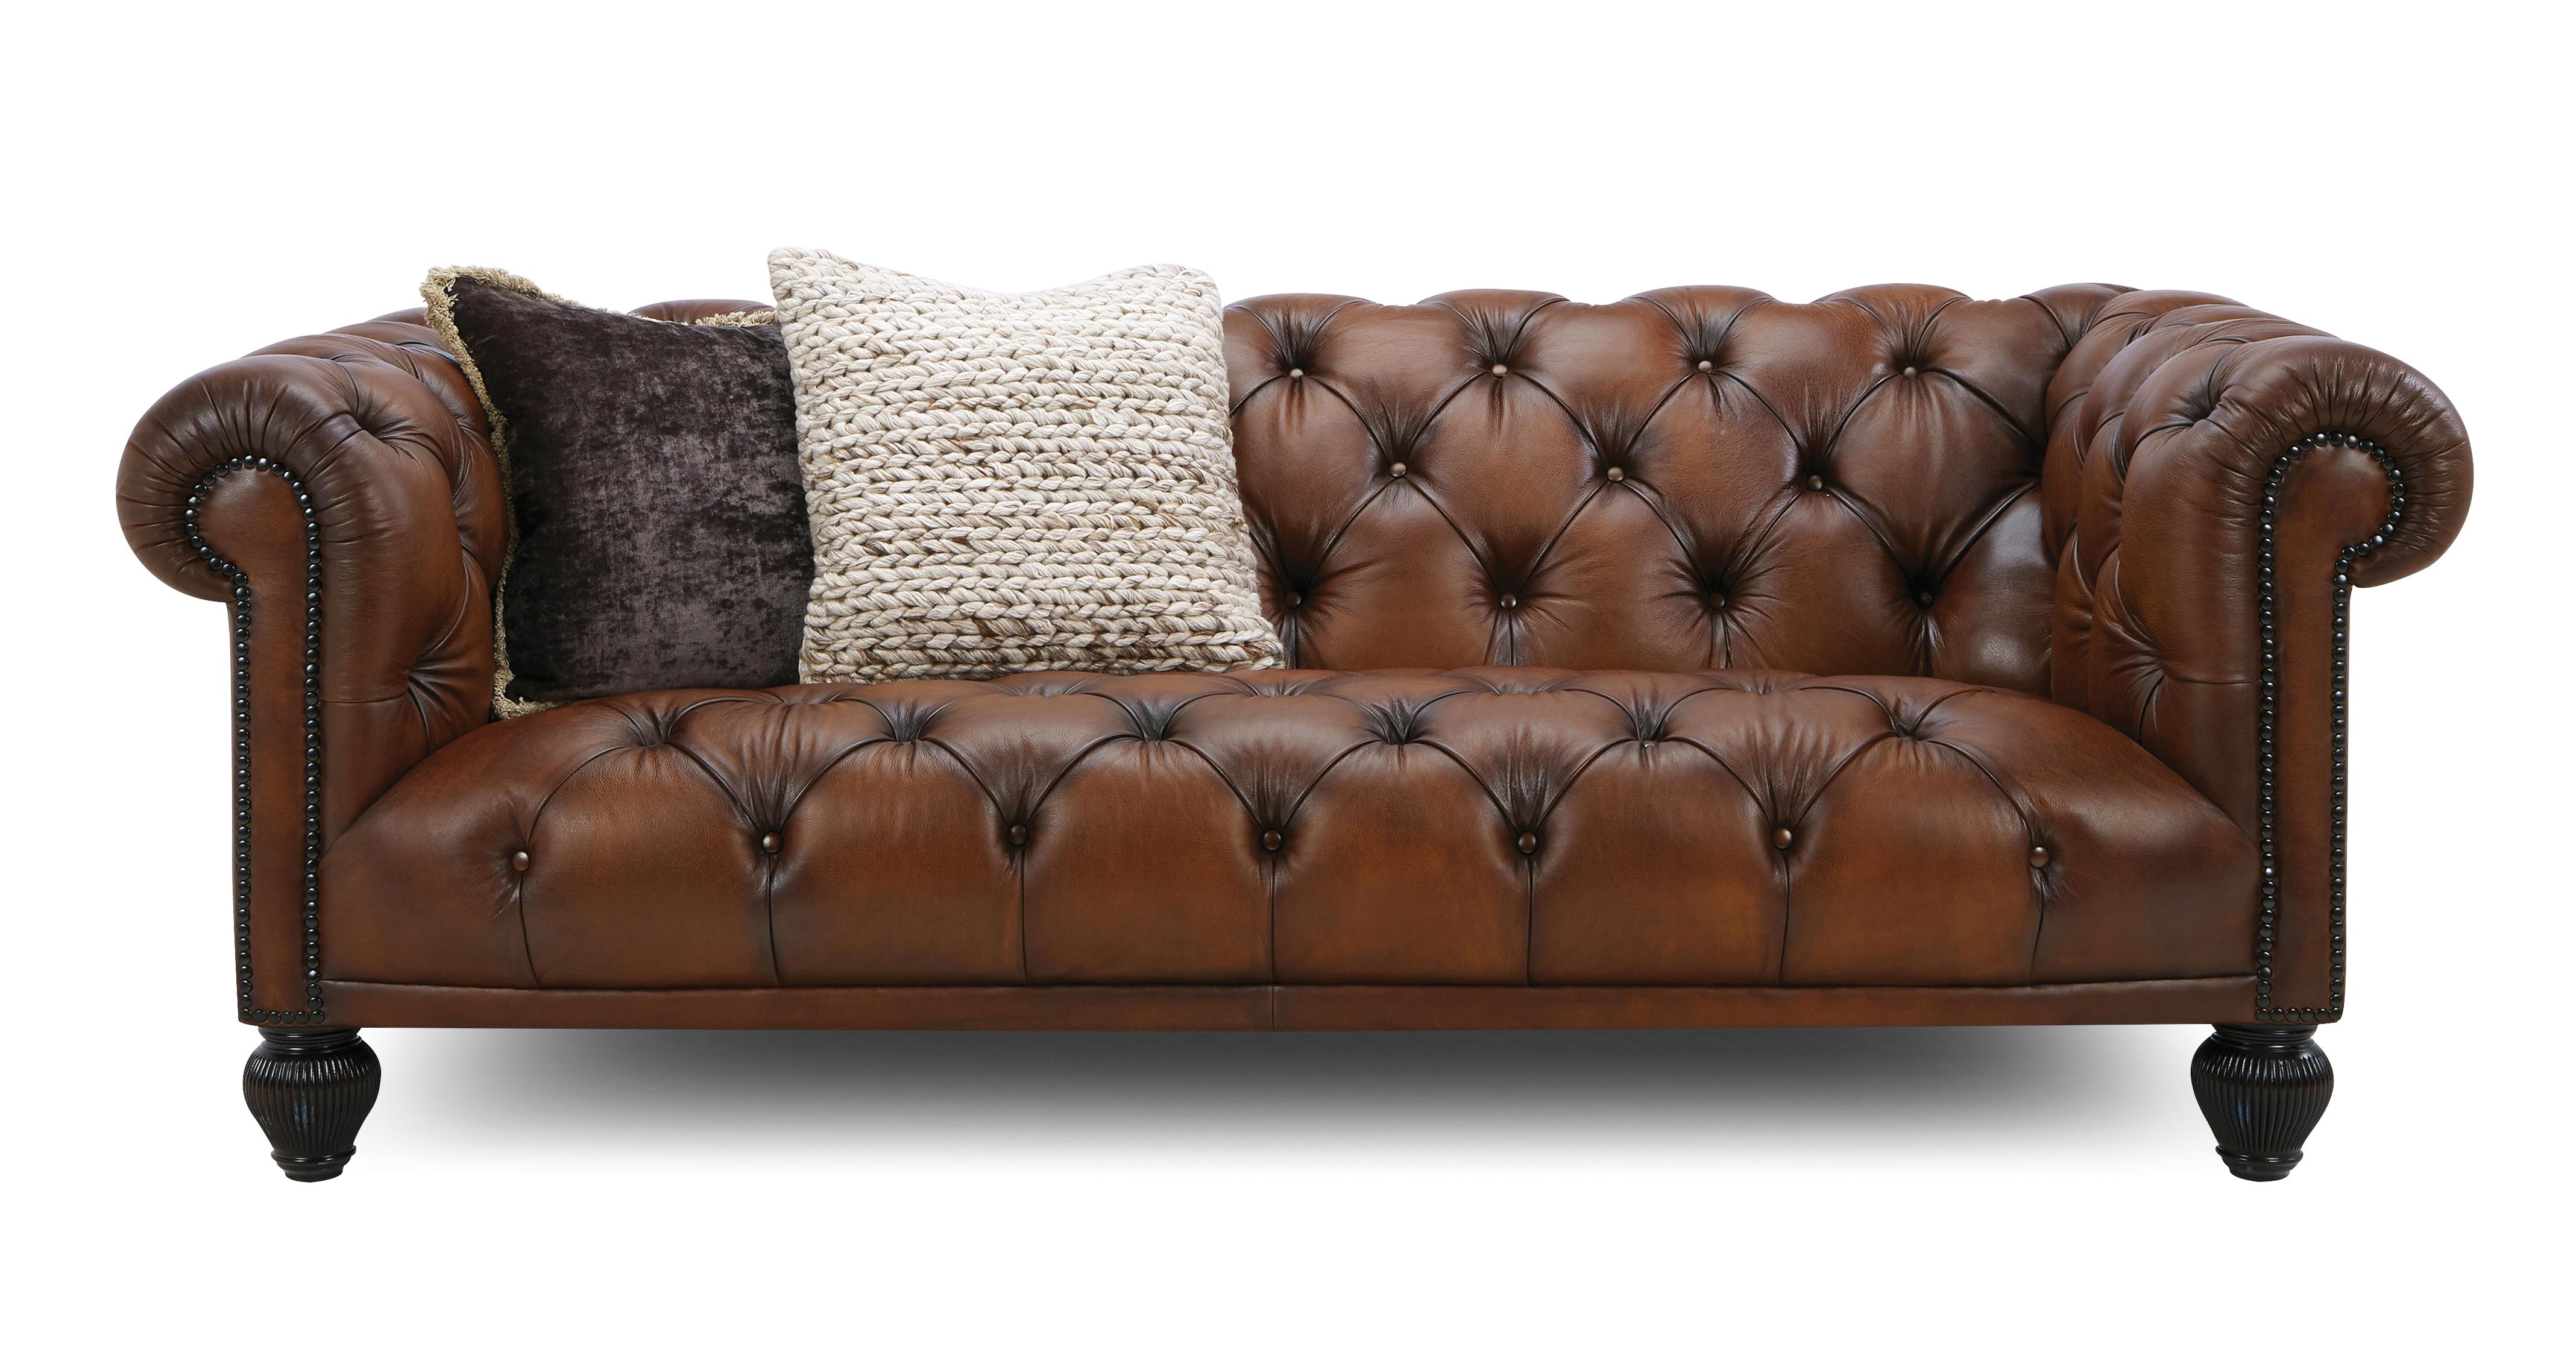 Montgomery 3 Seater Sofa Antique Leather | DFS